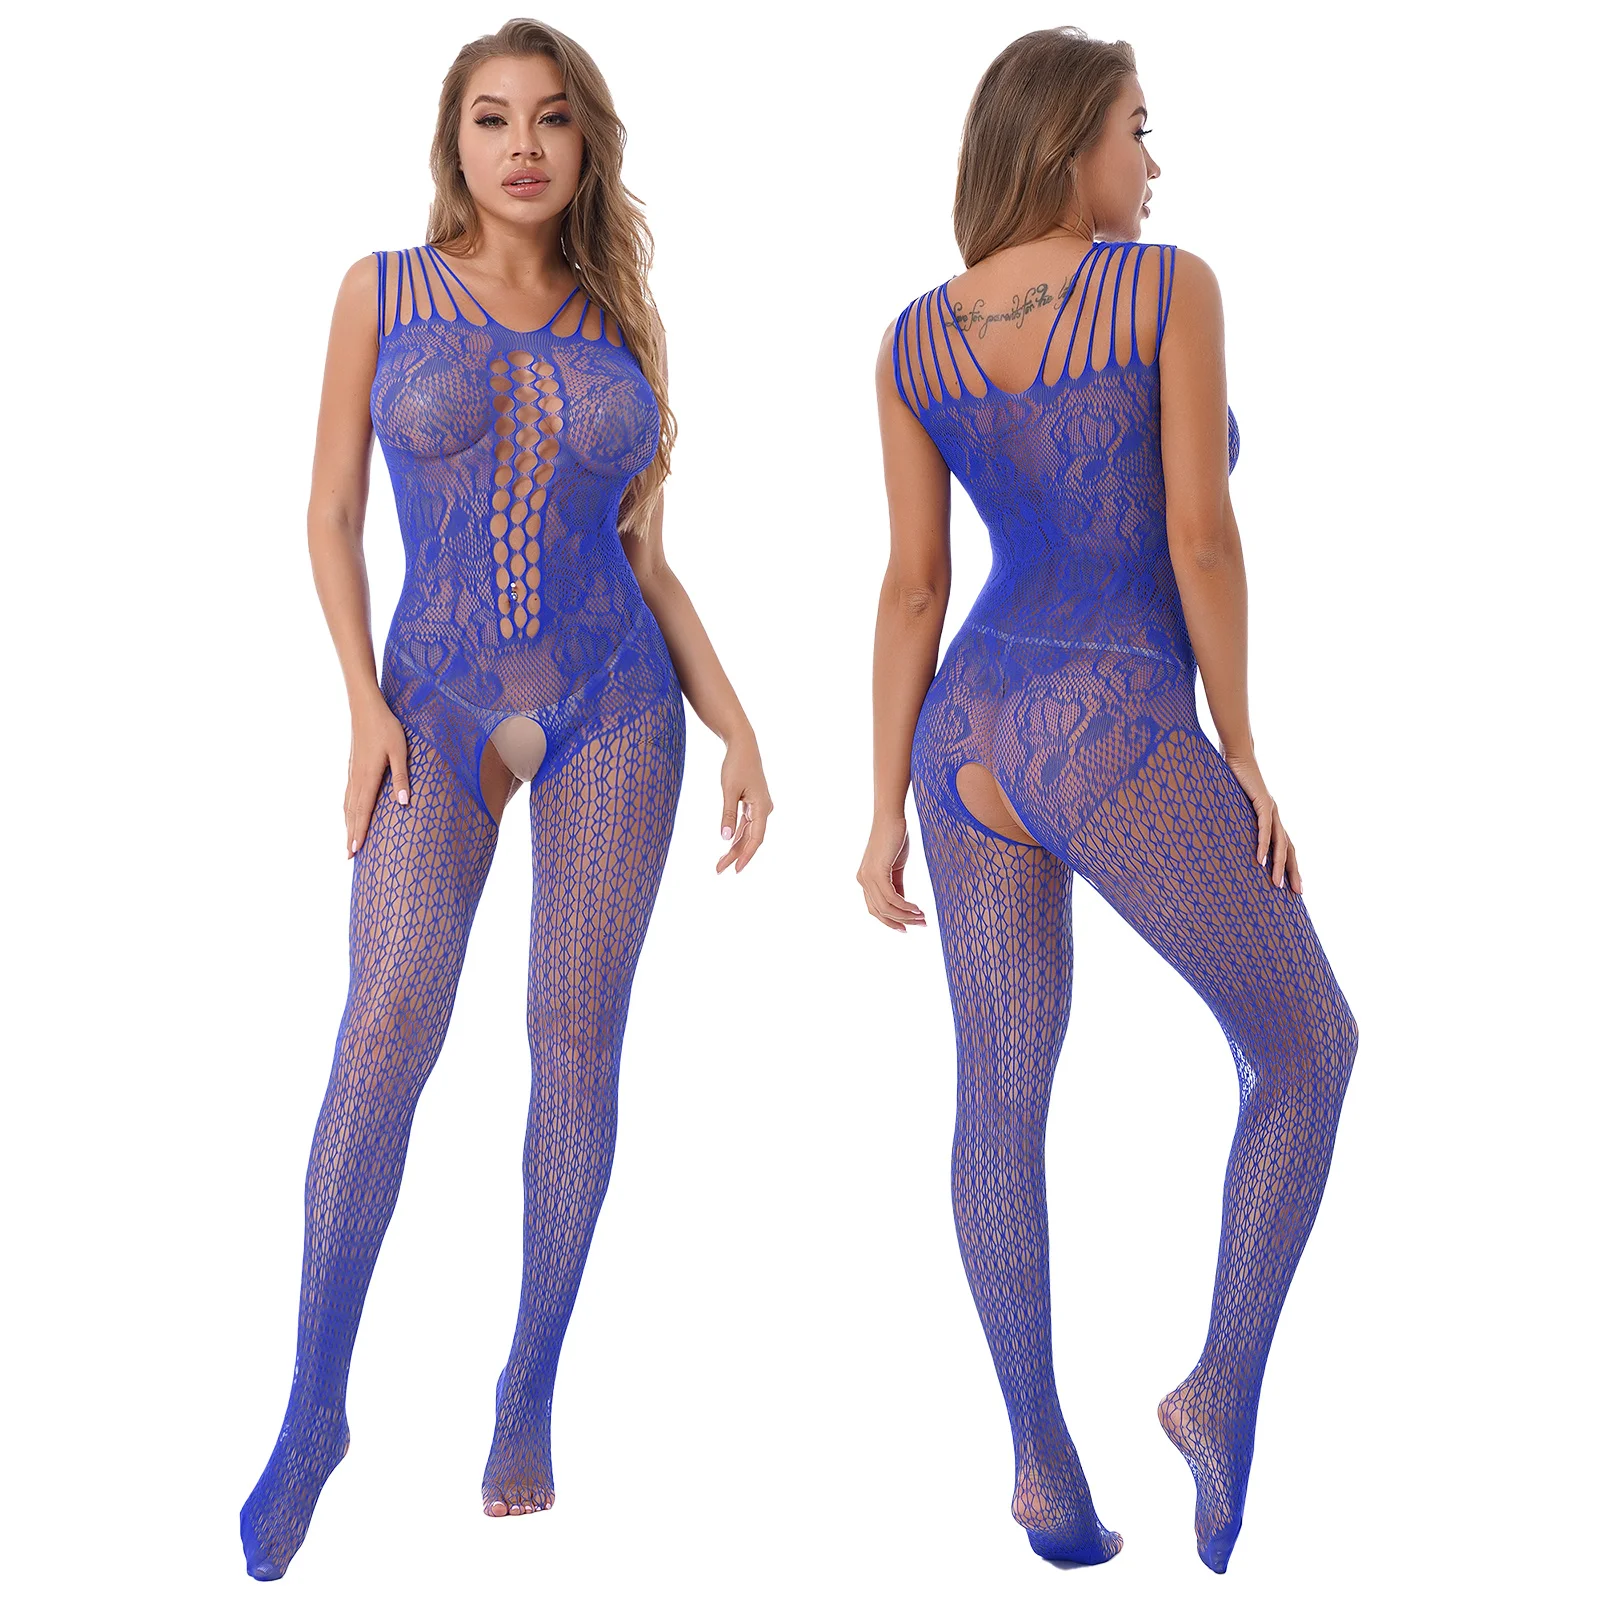 

Fishnet Bodysuits Catsuit Womens Transparent Open Crotch Bodystocking See Through Body Stockings Mesh Mesh Hot Erotic Lingerie